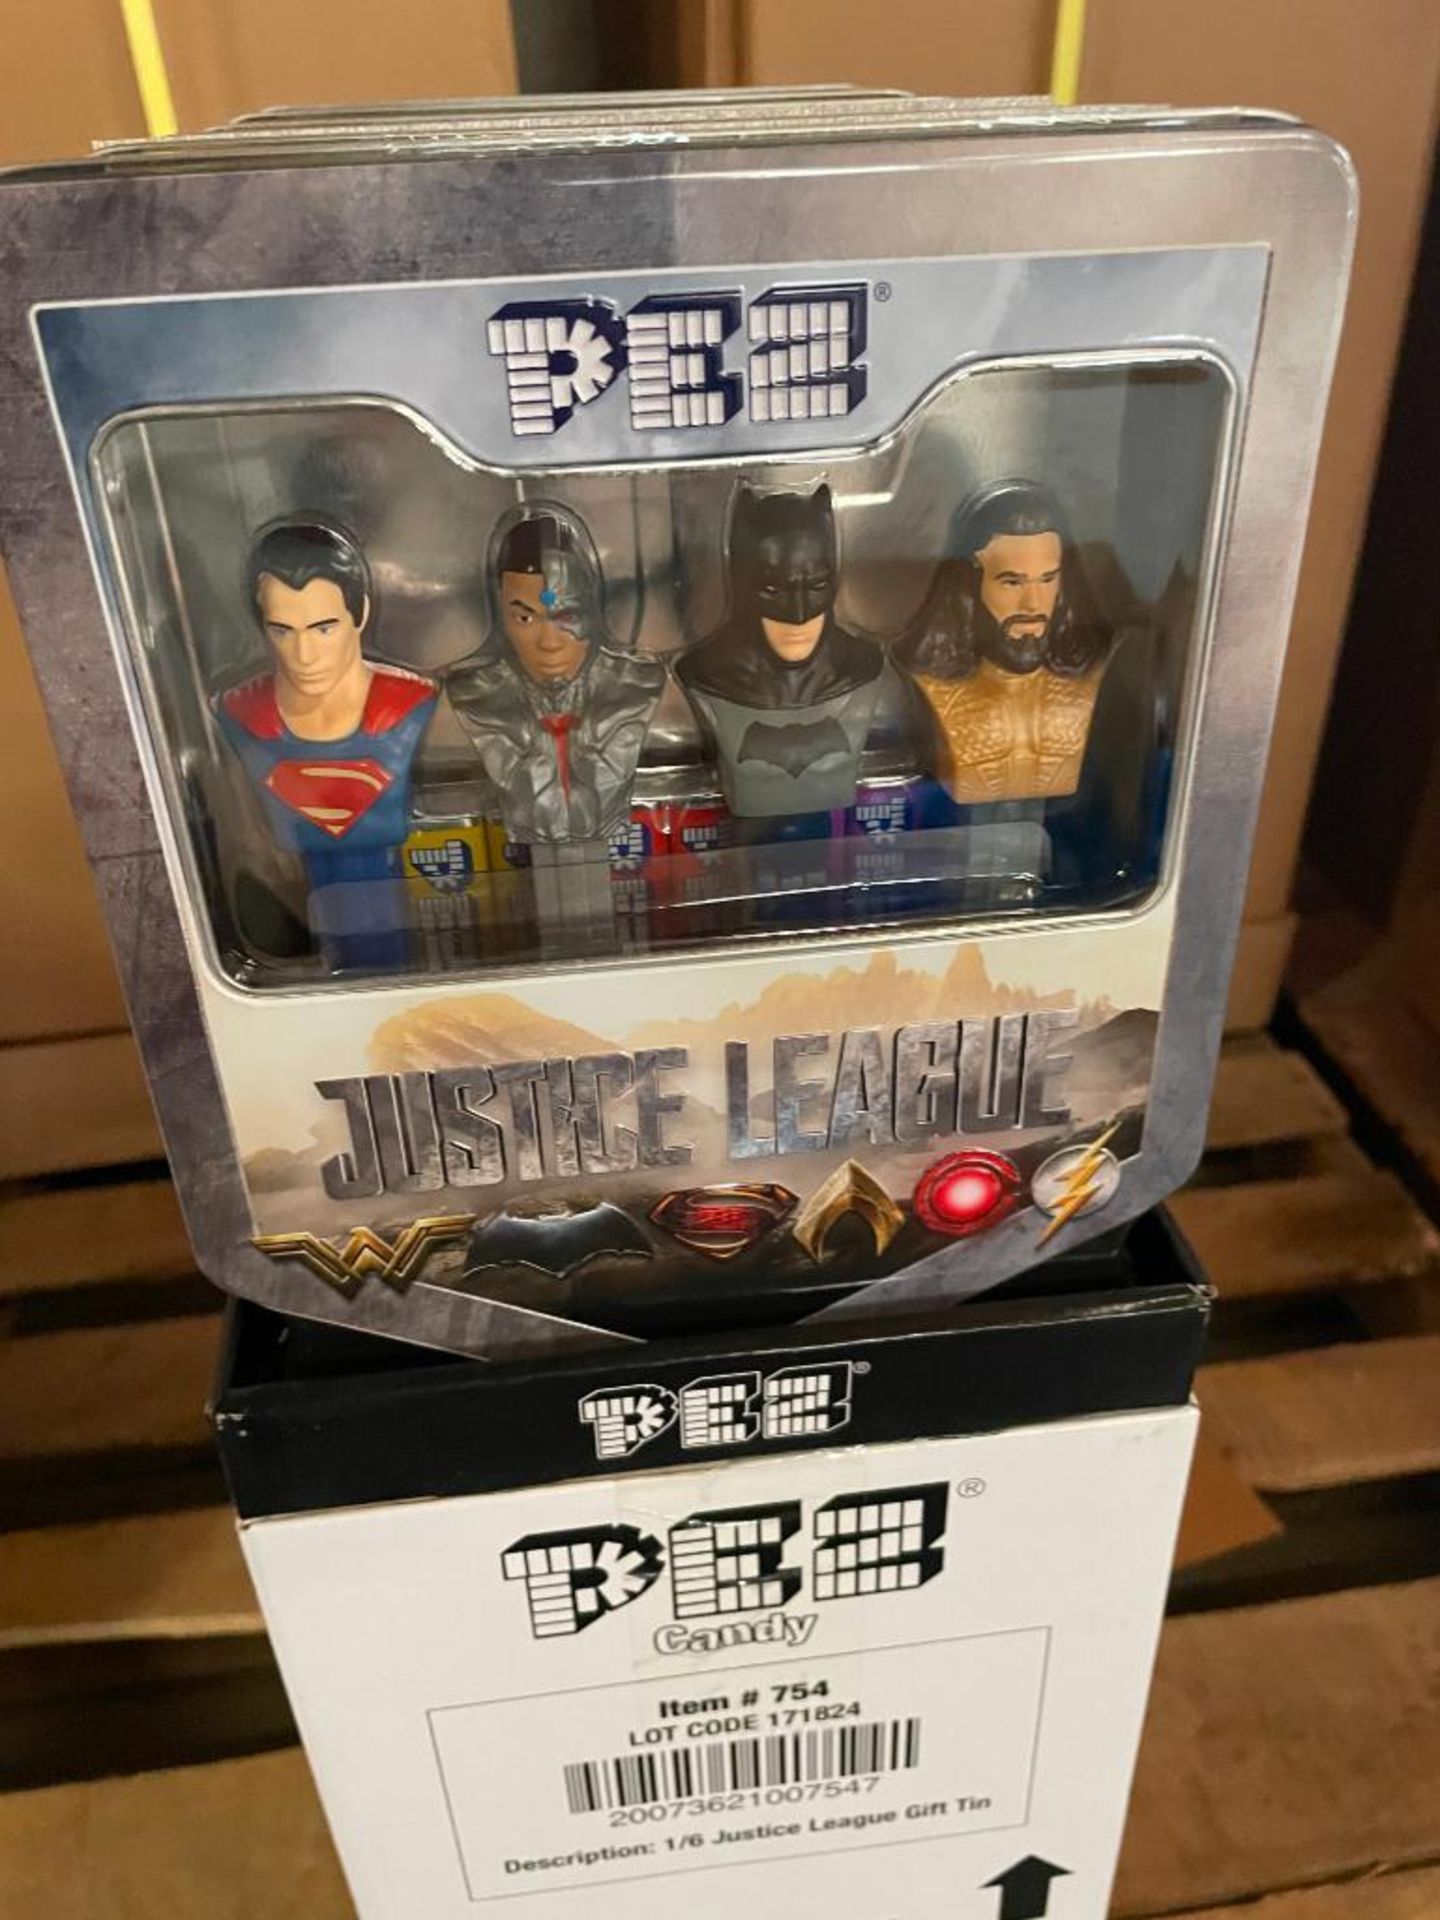 LOT OF APPROX. (3) BOXES OF JUSTICE LEAGUE GIFT TINS PEZ DISPENSERS - Image 3 of 3